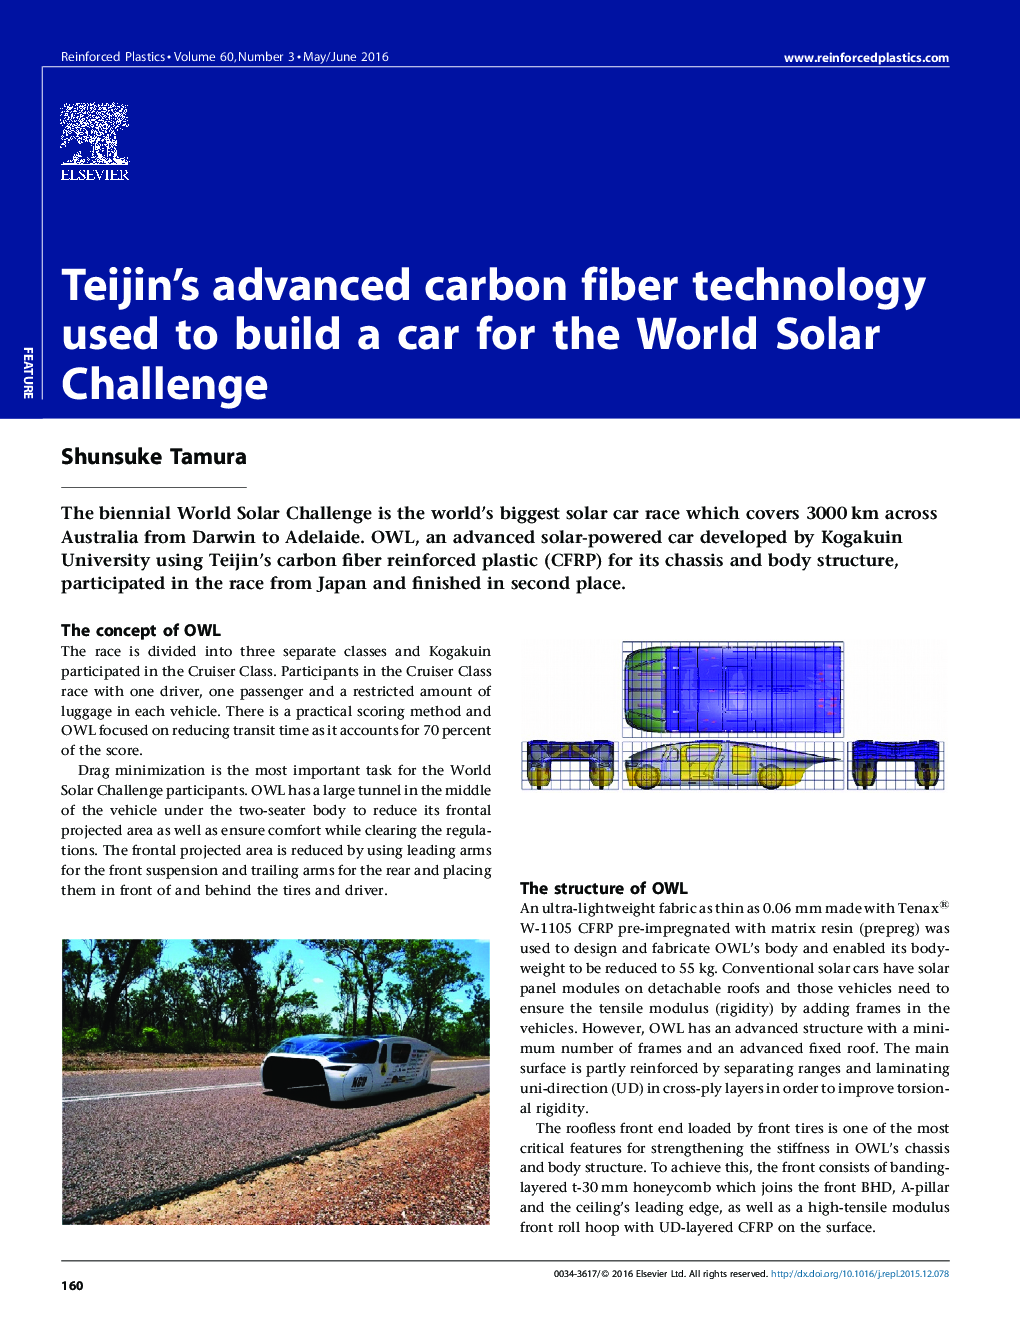 Teijin's advanced carbon fiber technology used to build a car for the World Solar Challenge